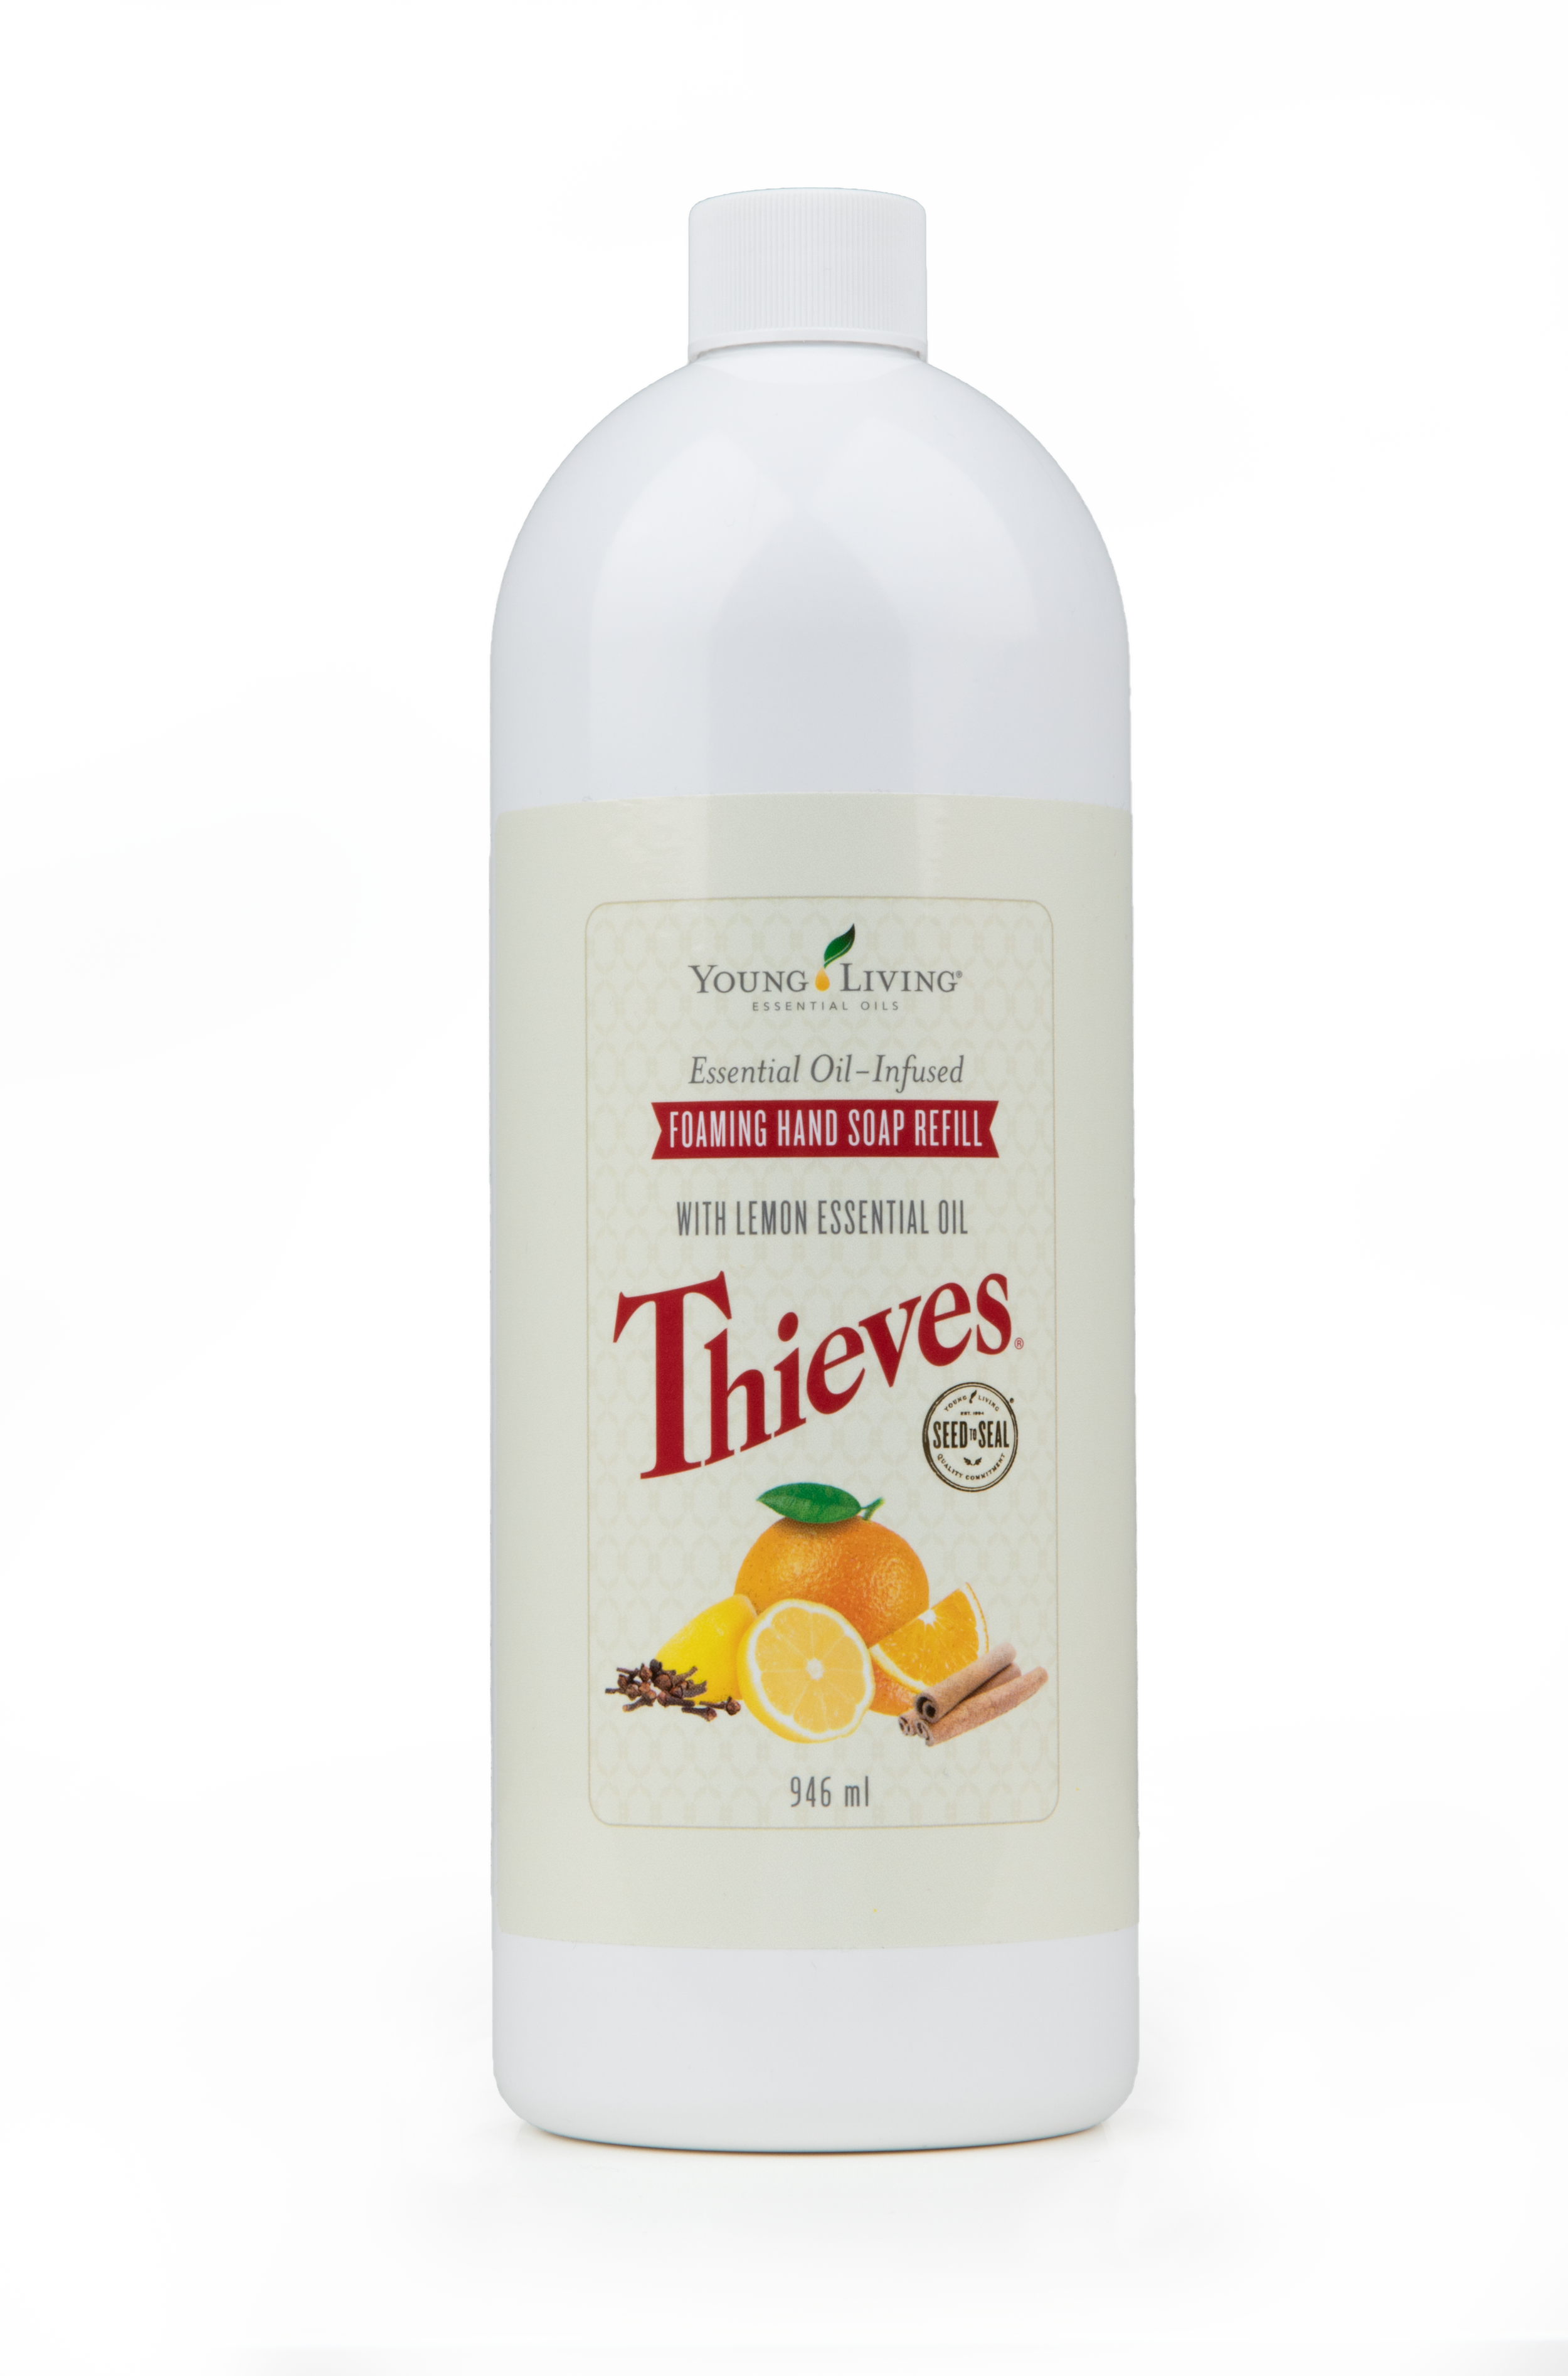 Thieves Hand soap refill Silo.png